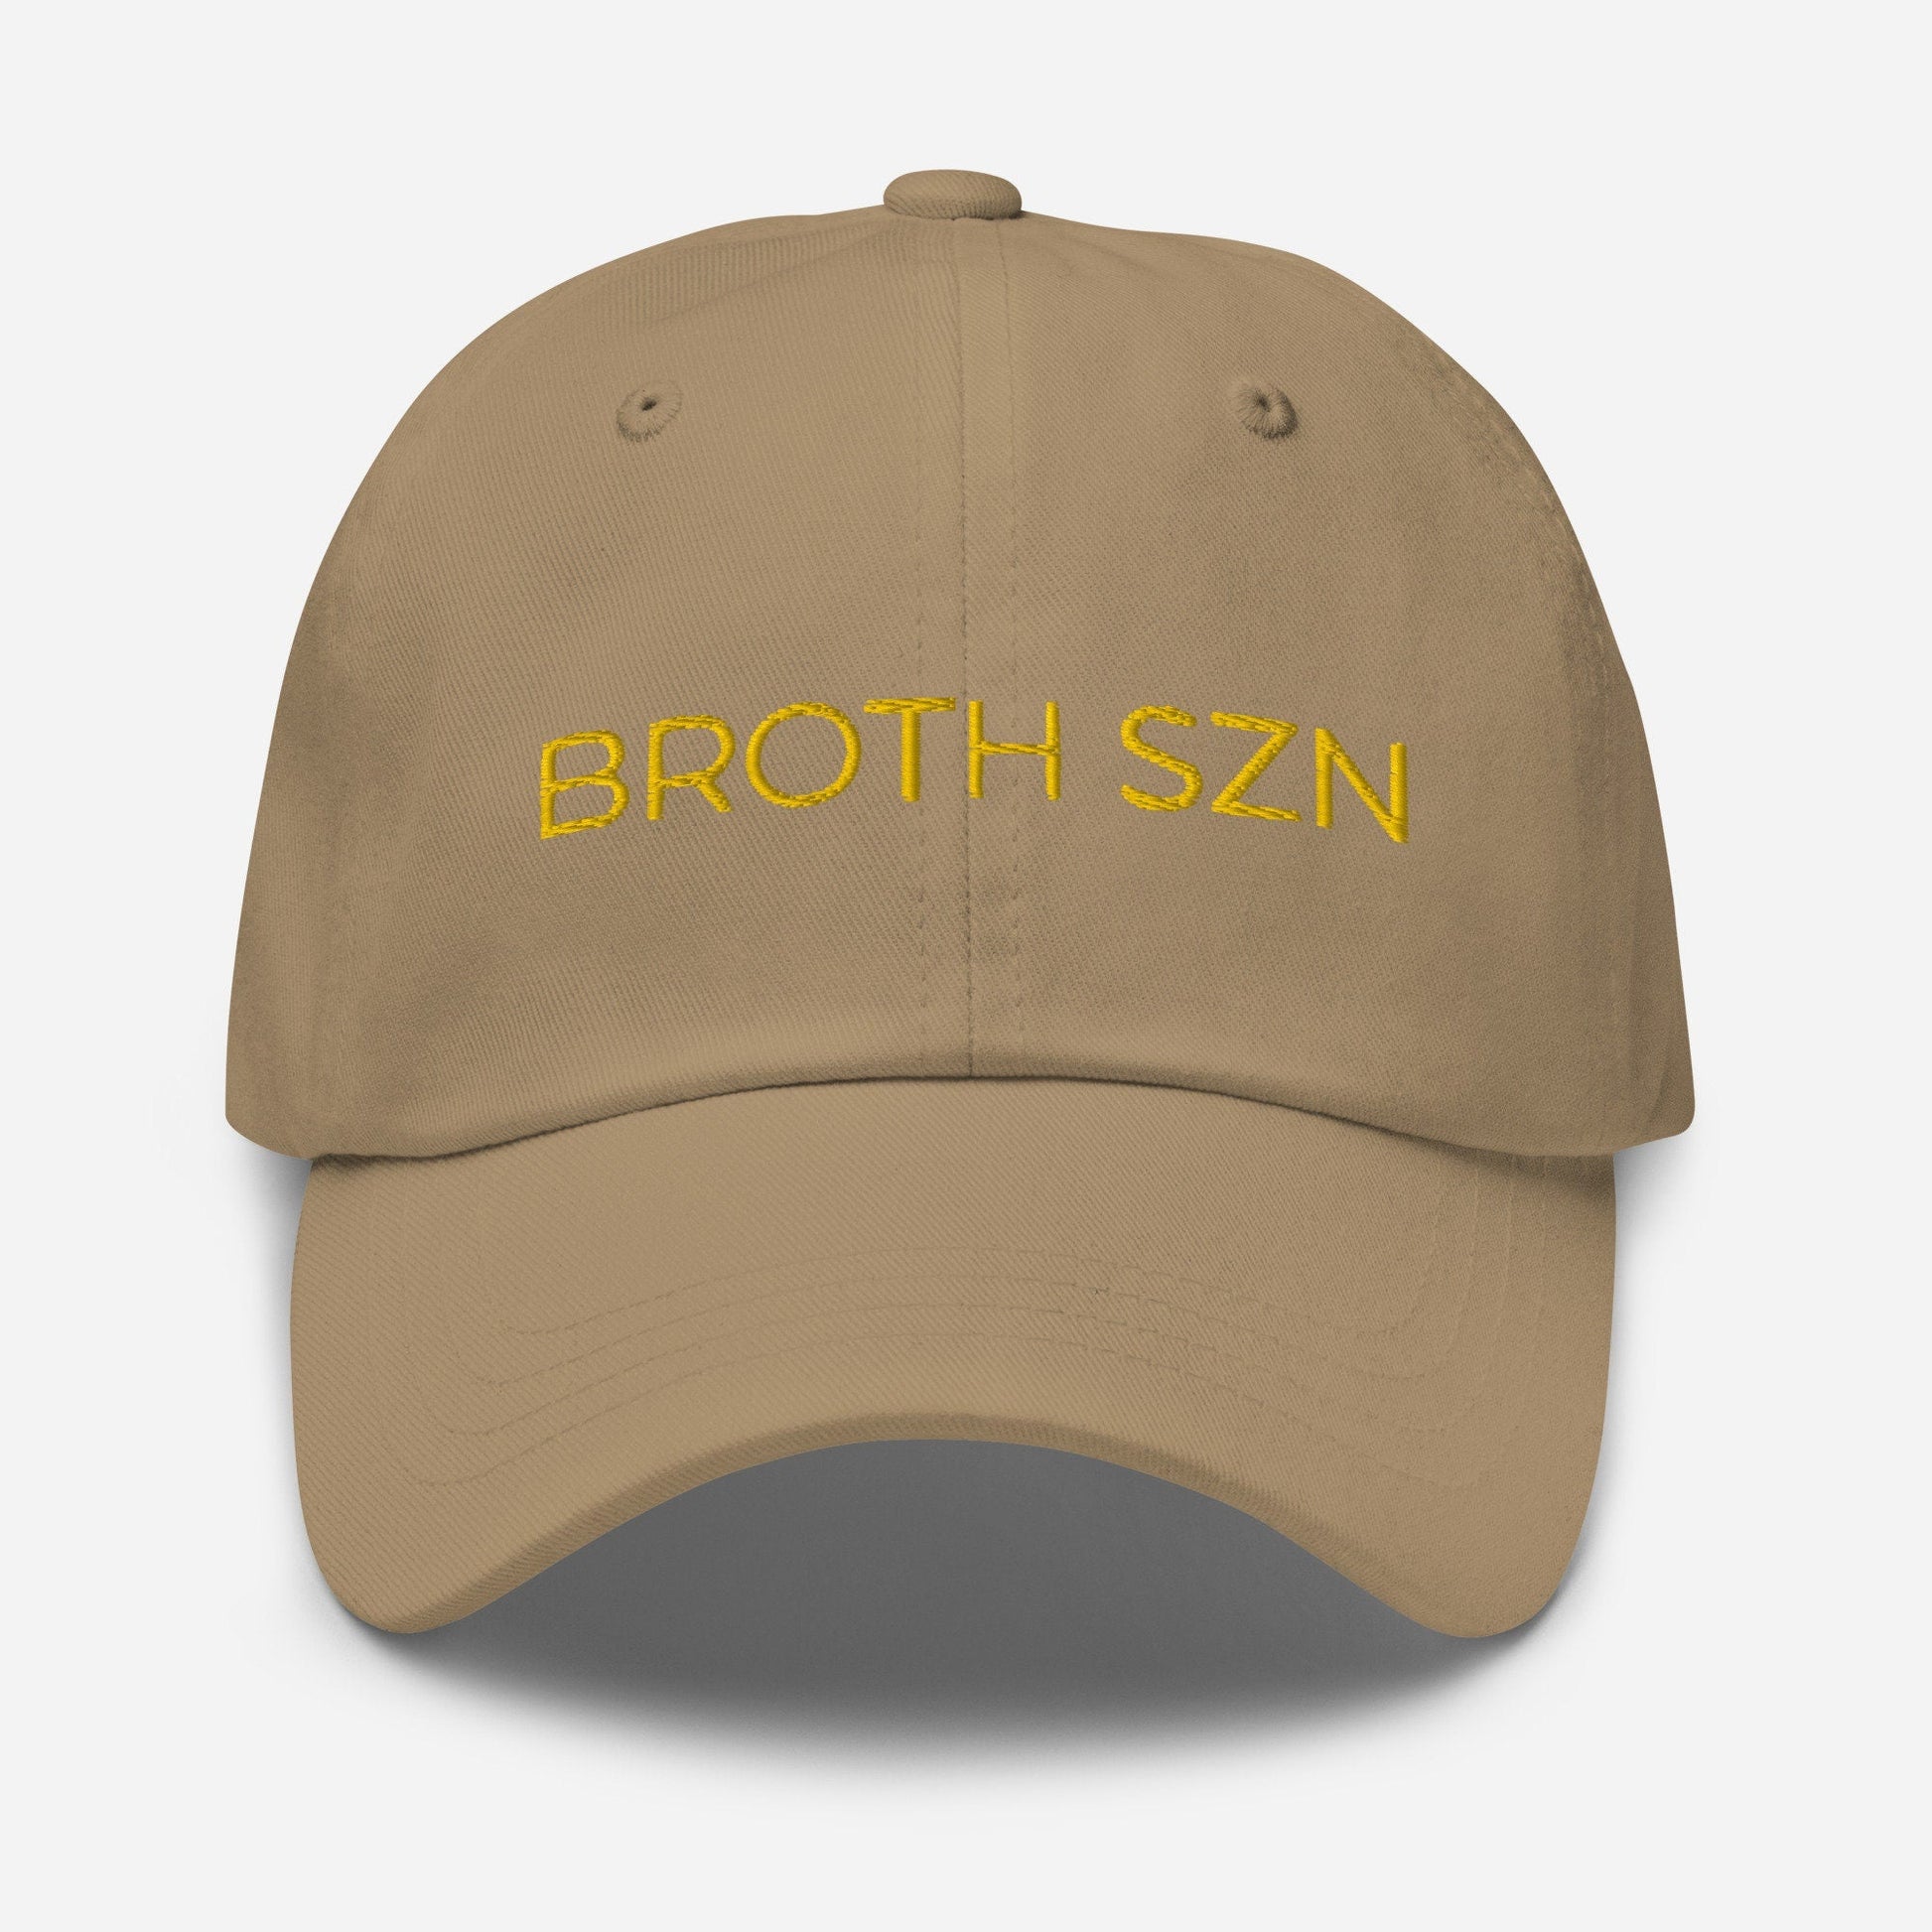 Broth Season Dad Hat - Gift for soup lovers and home chefs - Embroidered cotton cap - Evilwater Originals